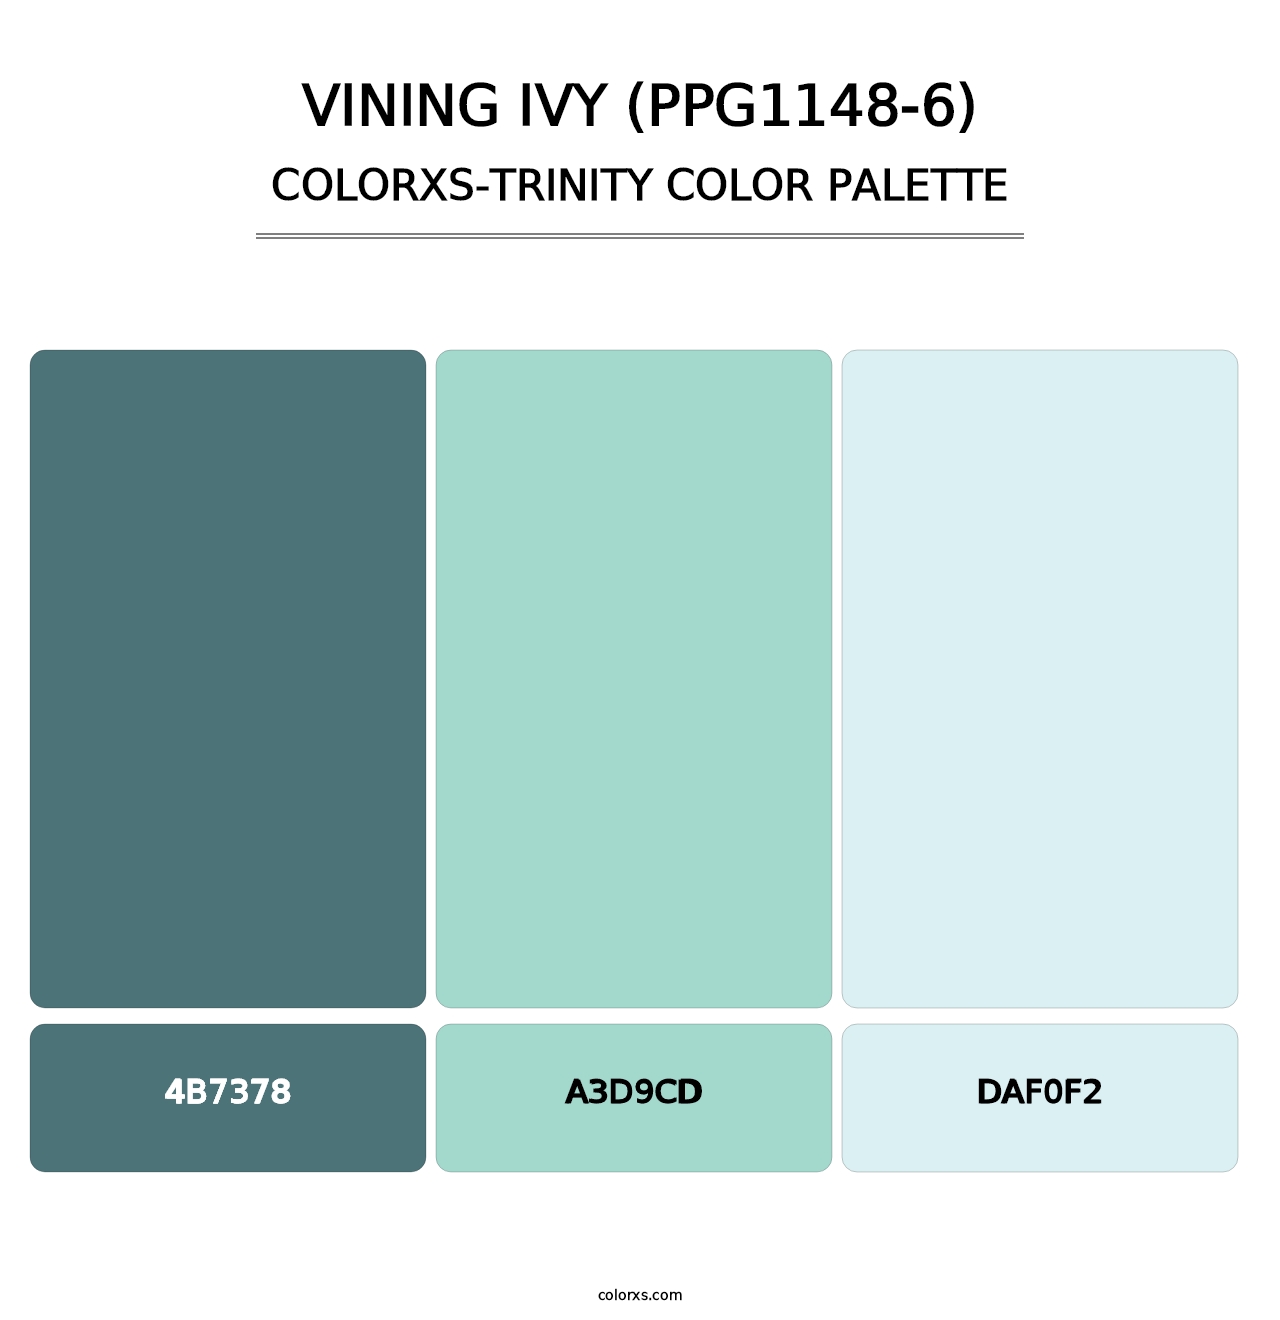 Vining Ivy (PPG1148-6) - Colorxs Trinity Palette